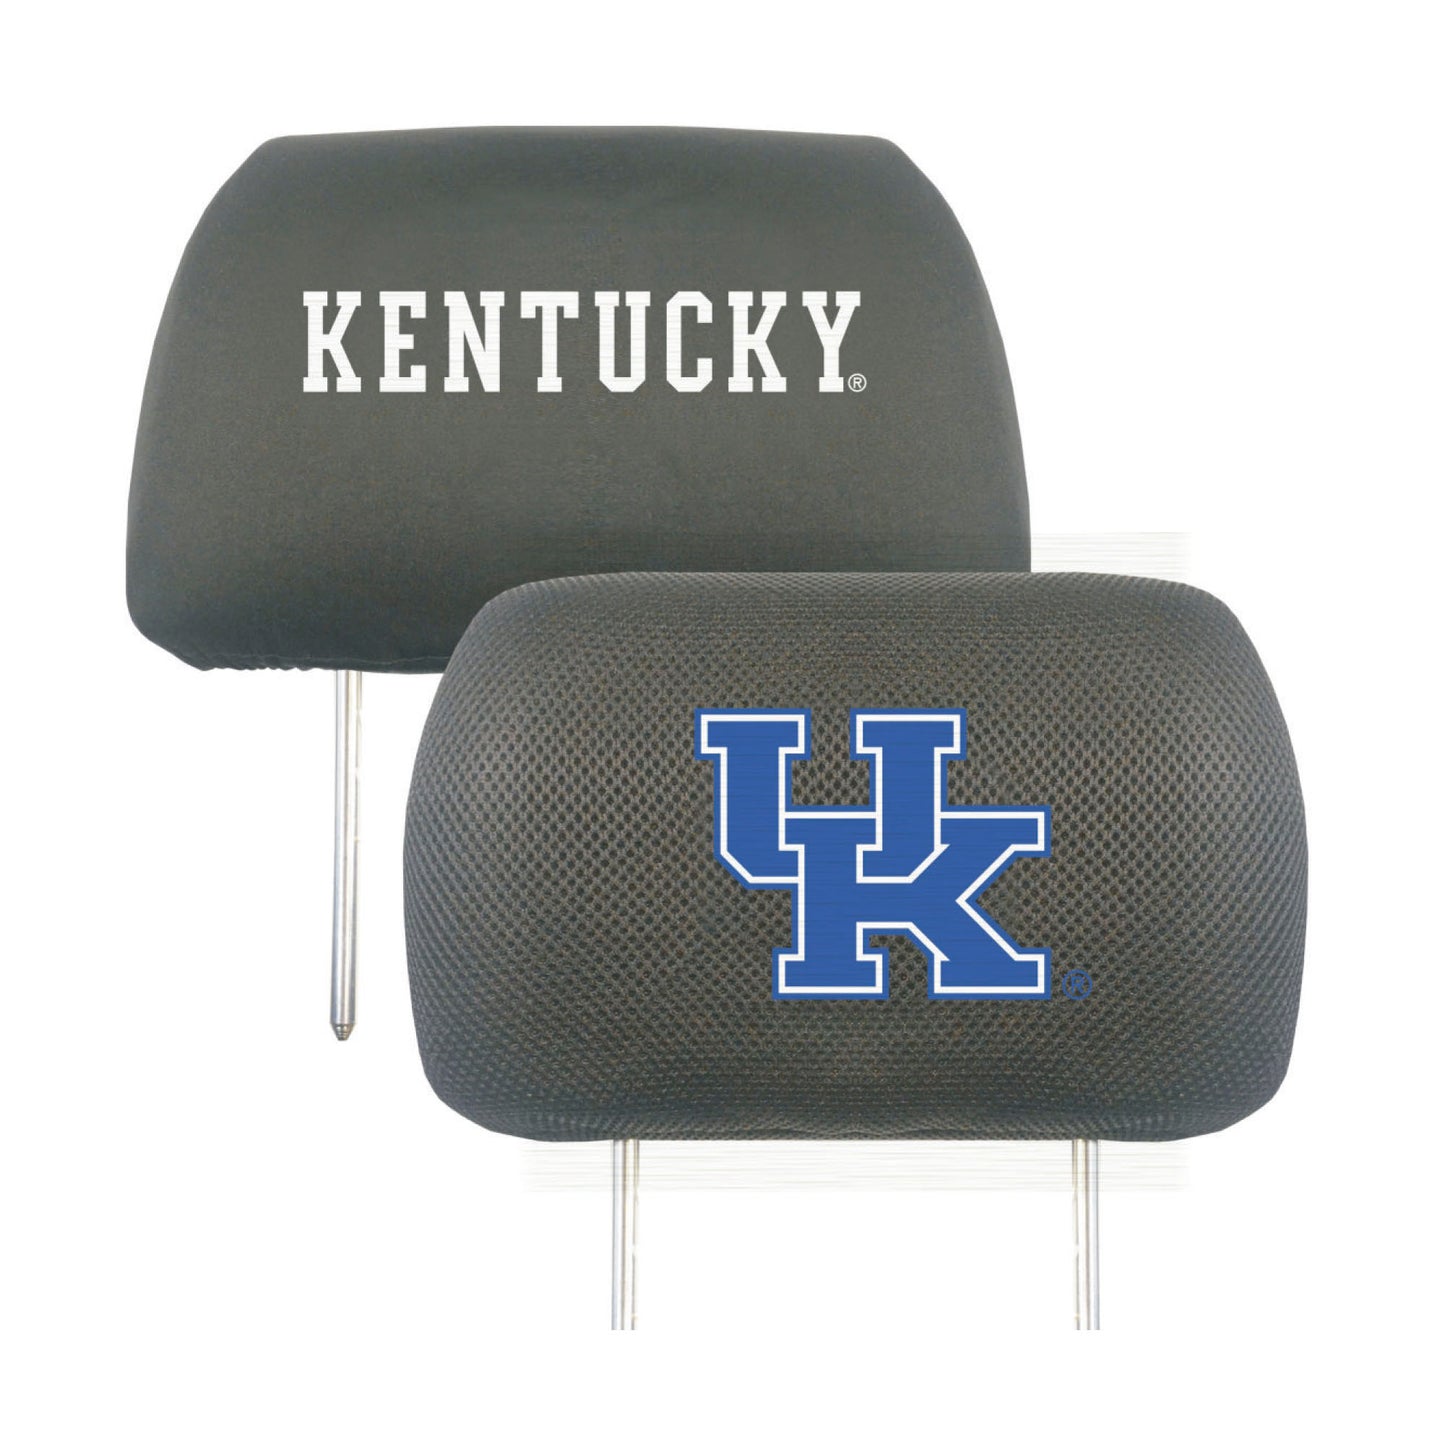 Kentucky Wildcats Embroidered Head Rest Cover Set - 2 Pieces